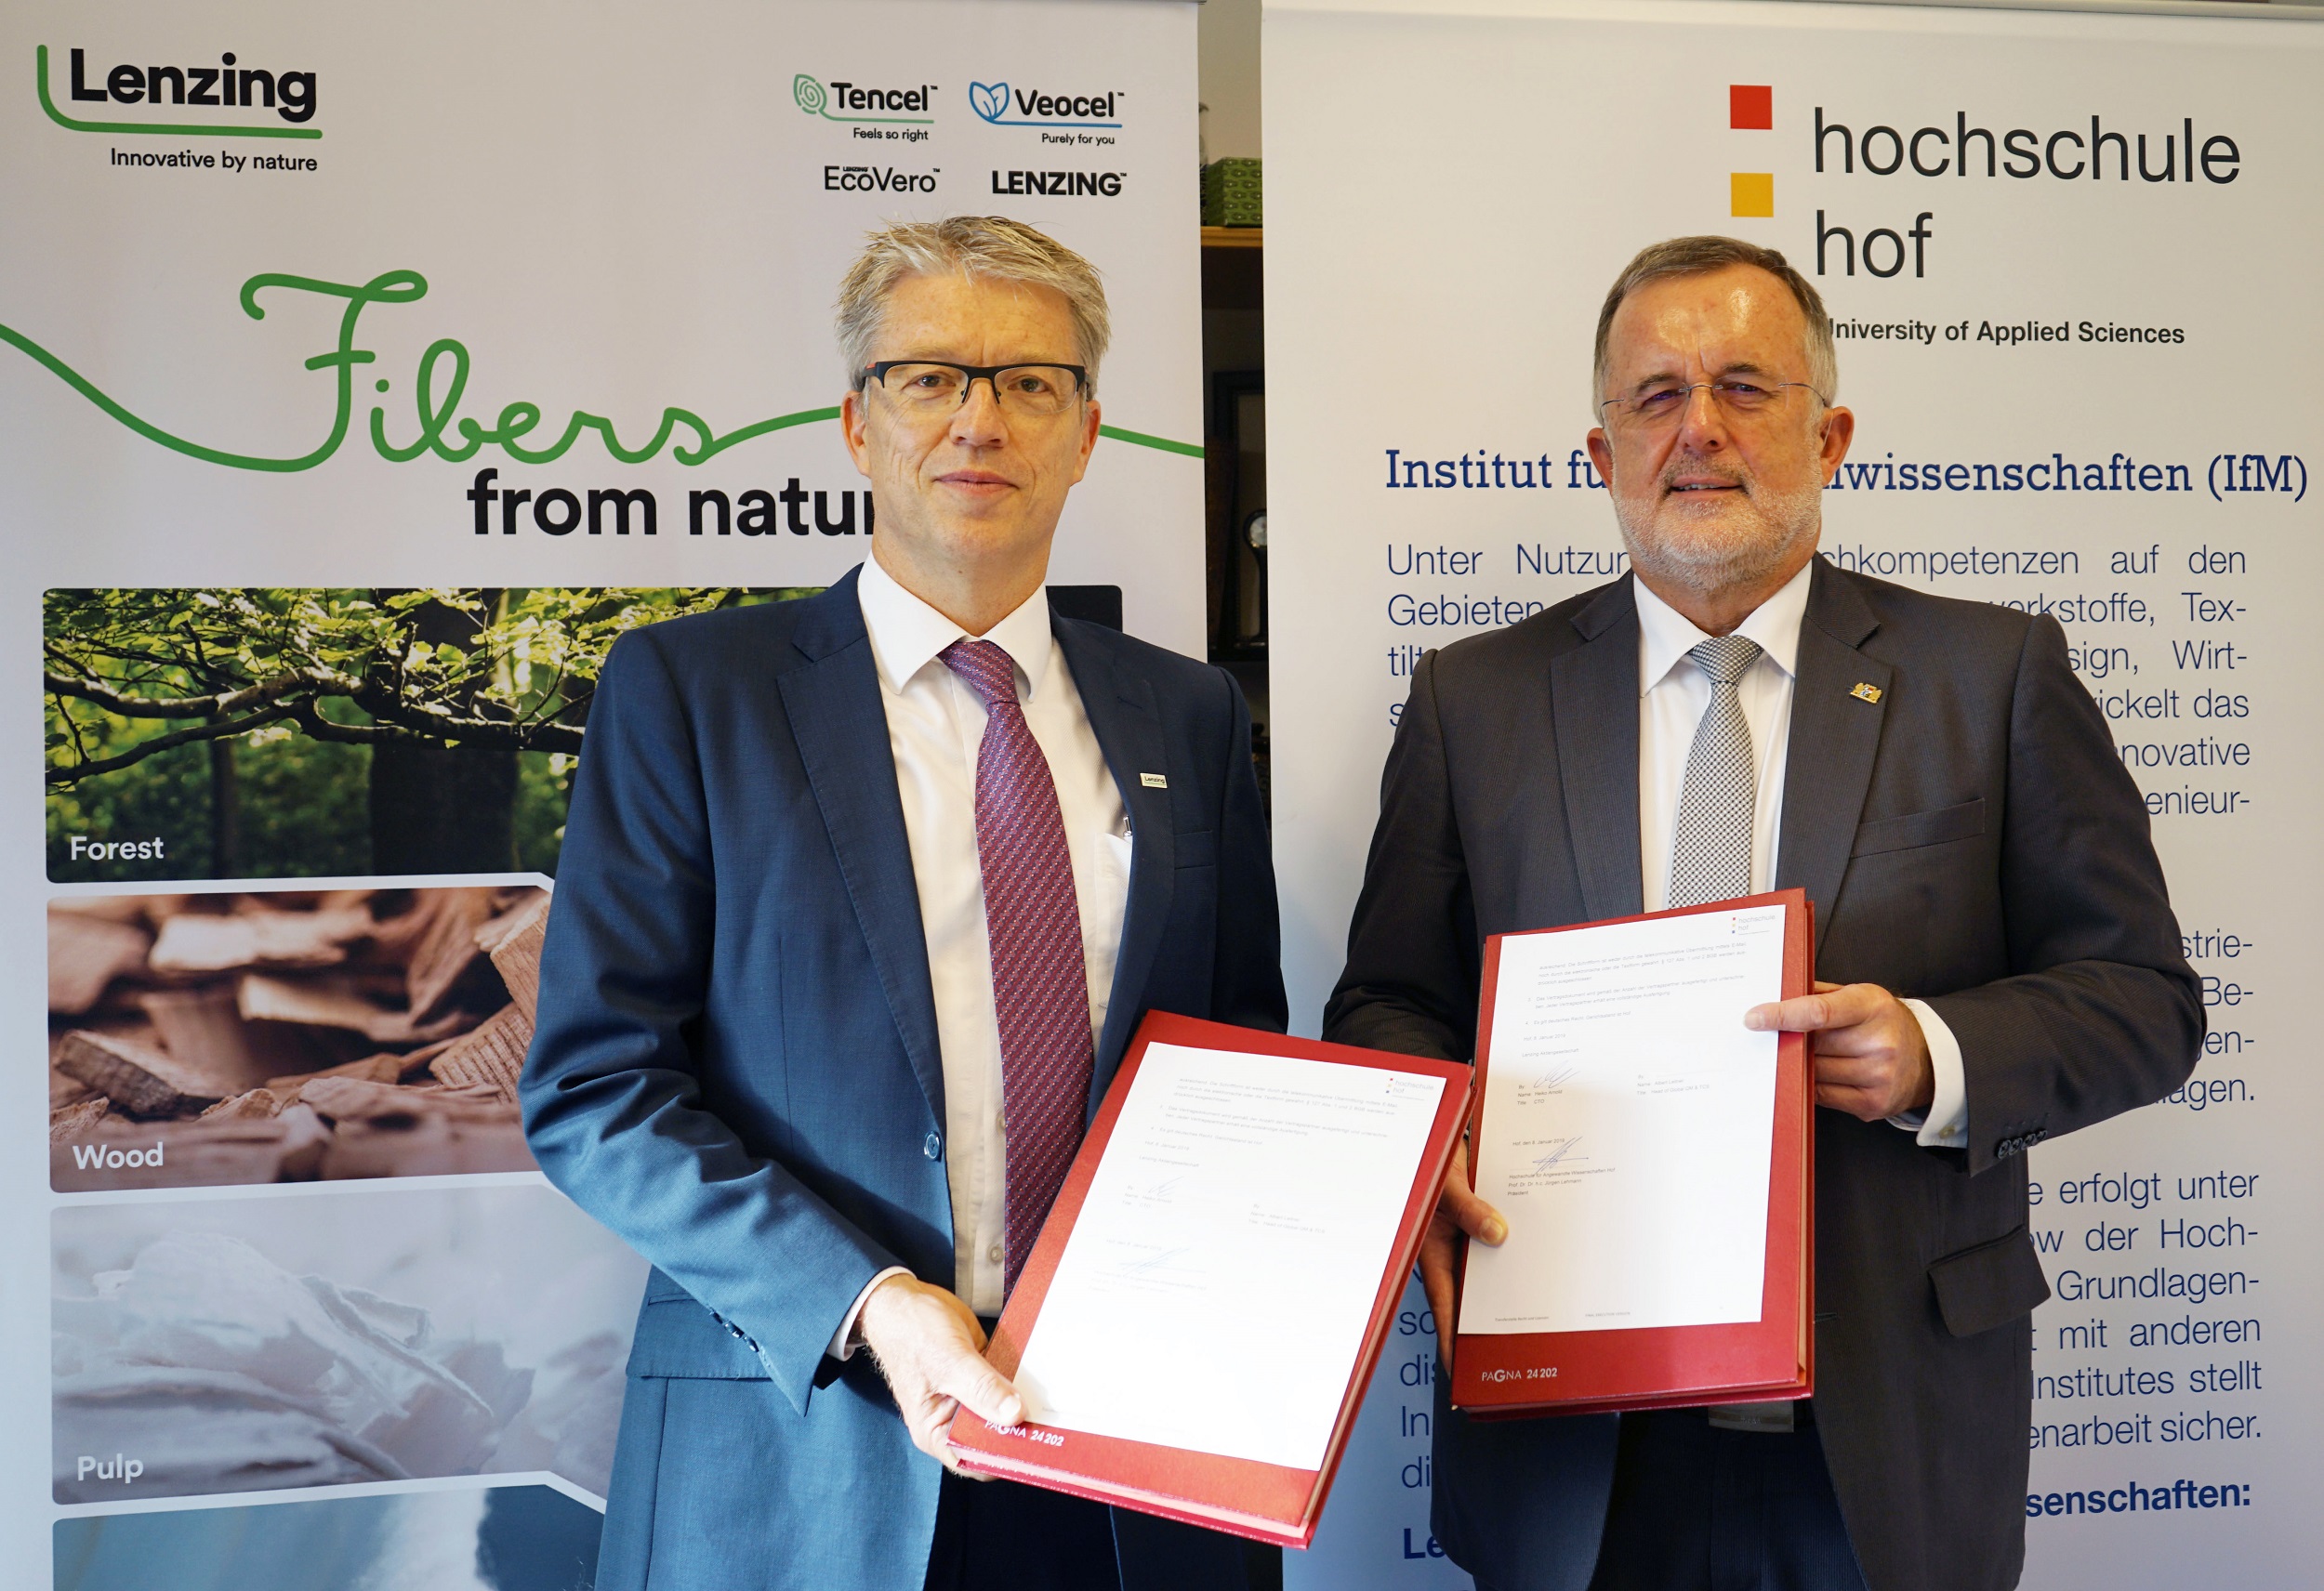 Heiko Arnold, chief technology officer of the Lenzing Group, and Jürgen Lehmann, president of Hof University of Applied Sciences in Saale, Germany.